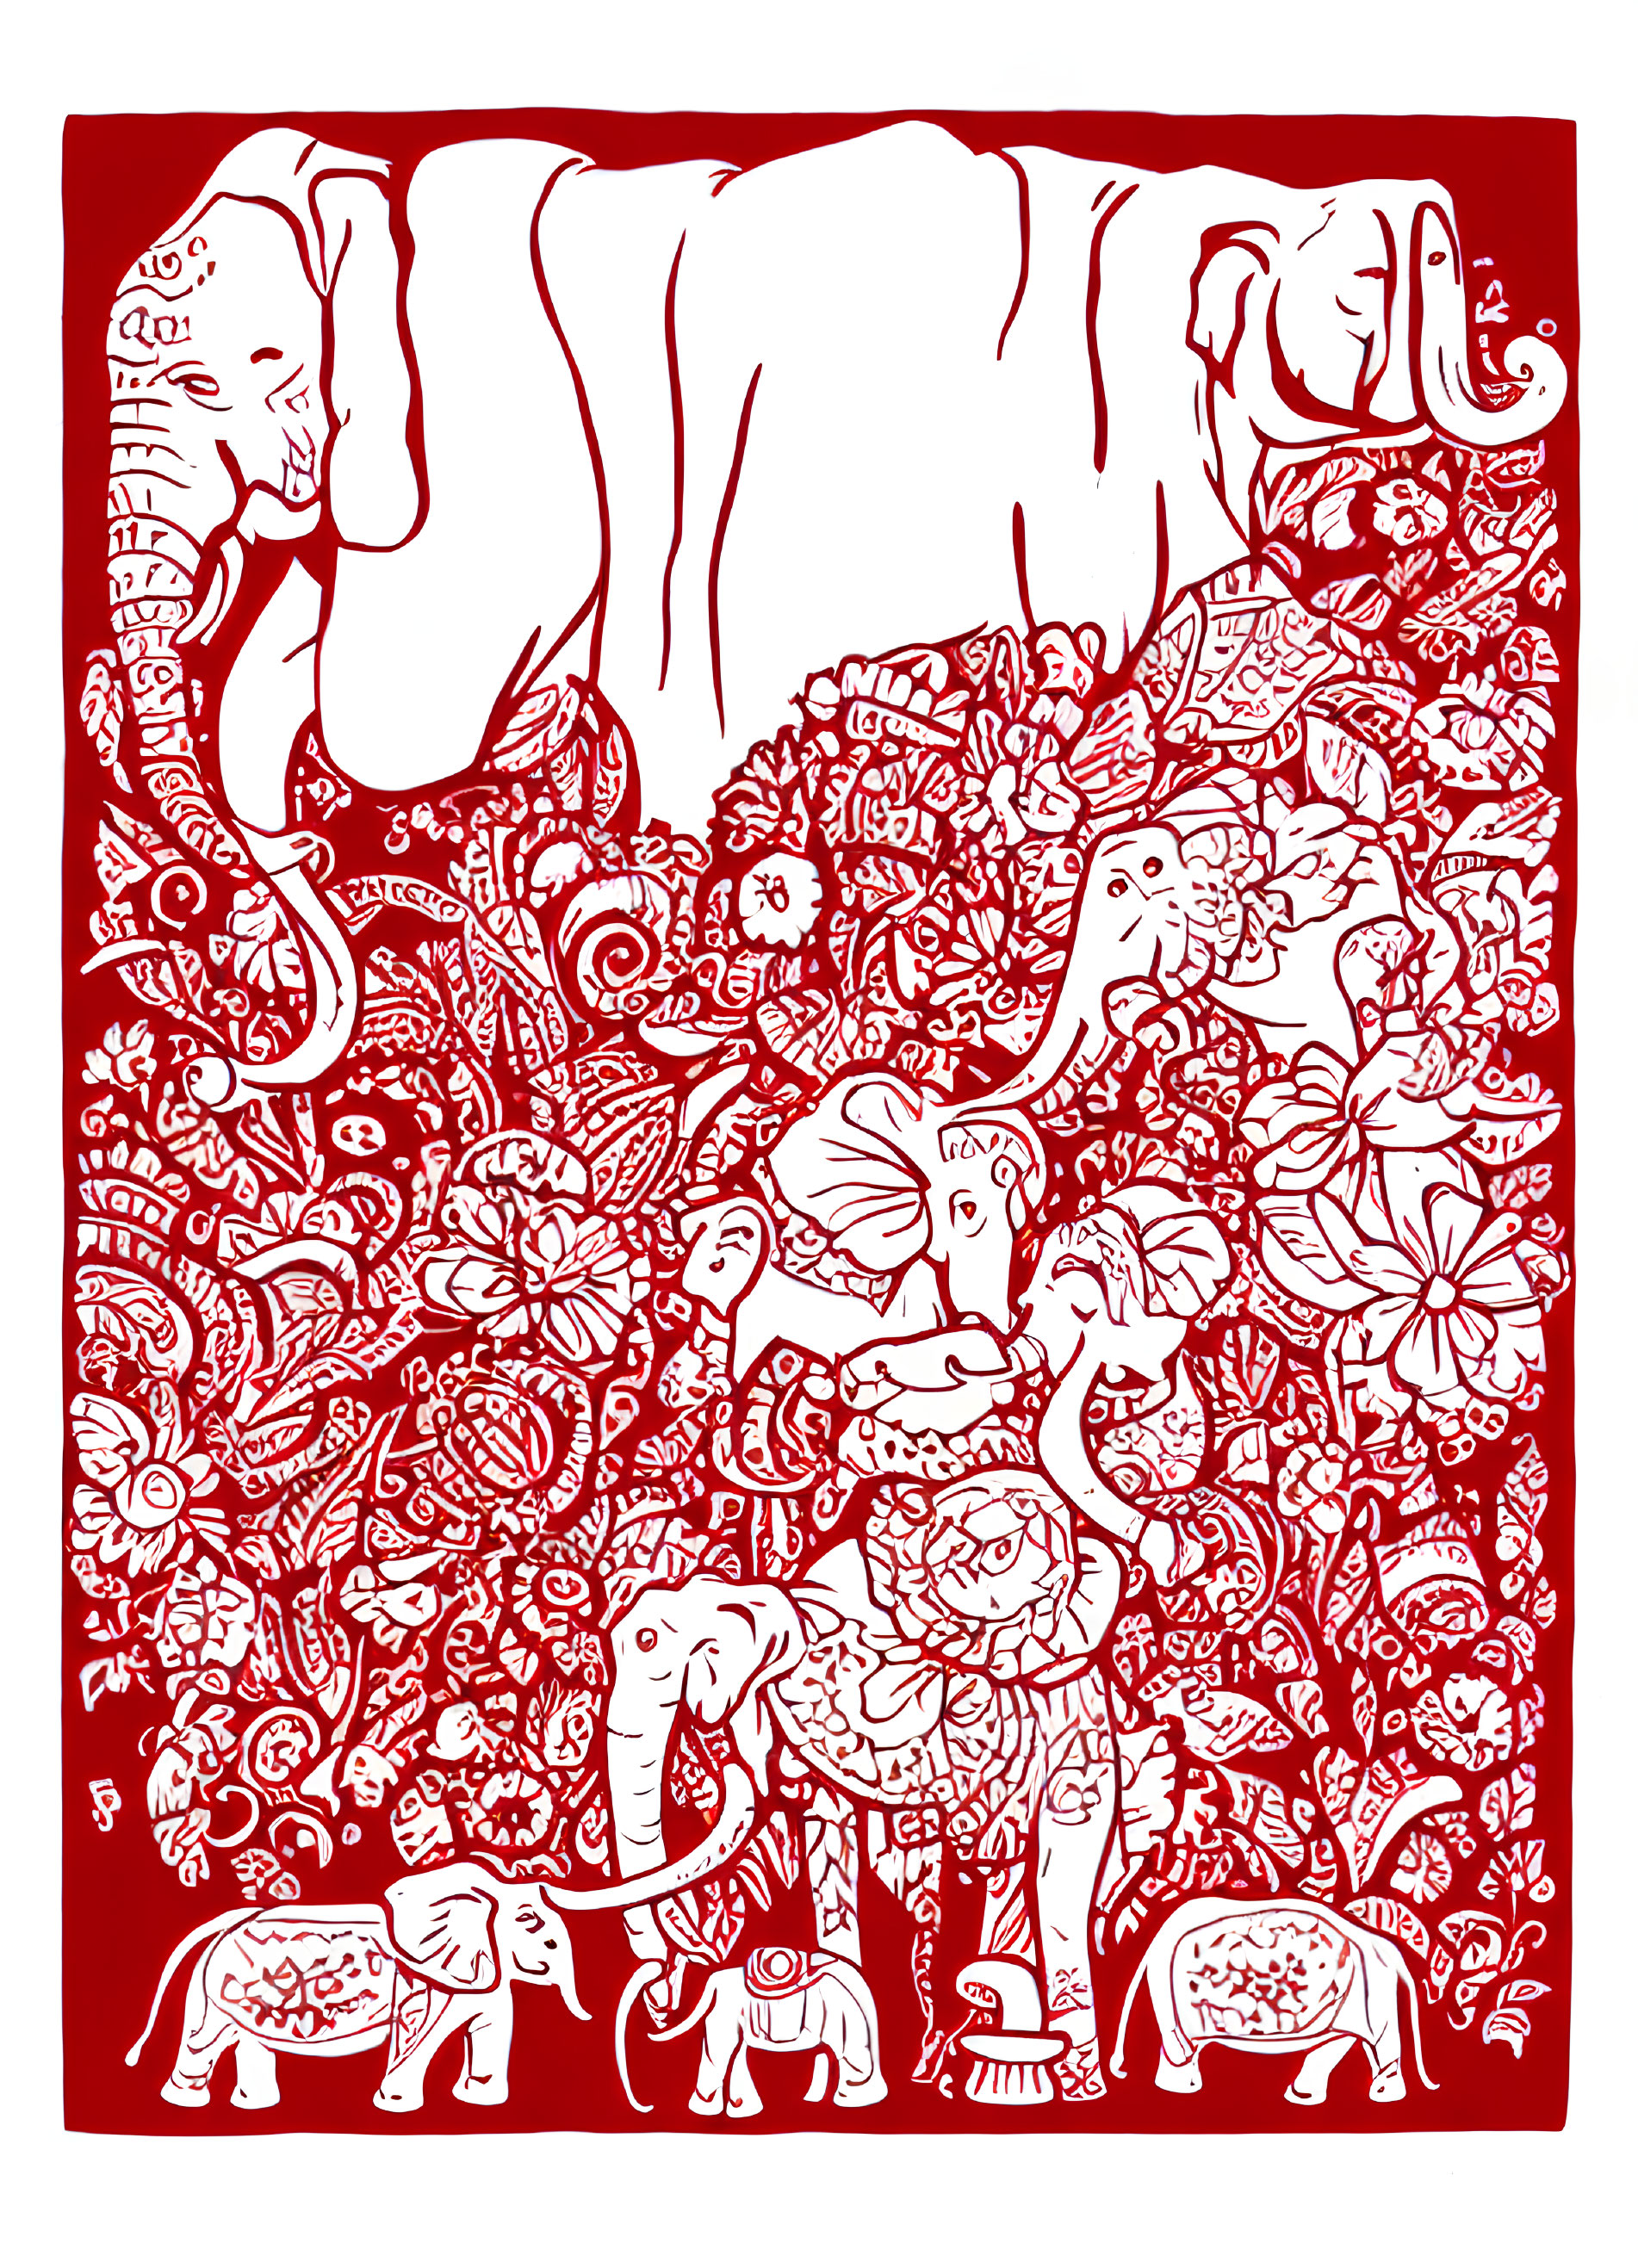 Detailed Red and White Elephant Illustration with Birds and Floral Patterns